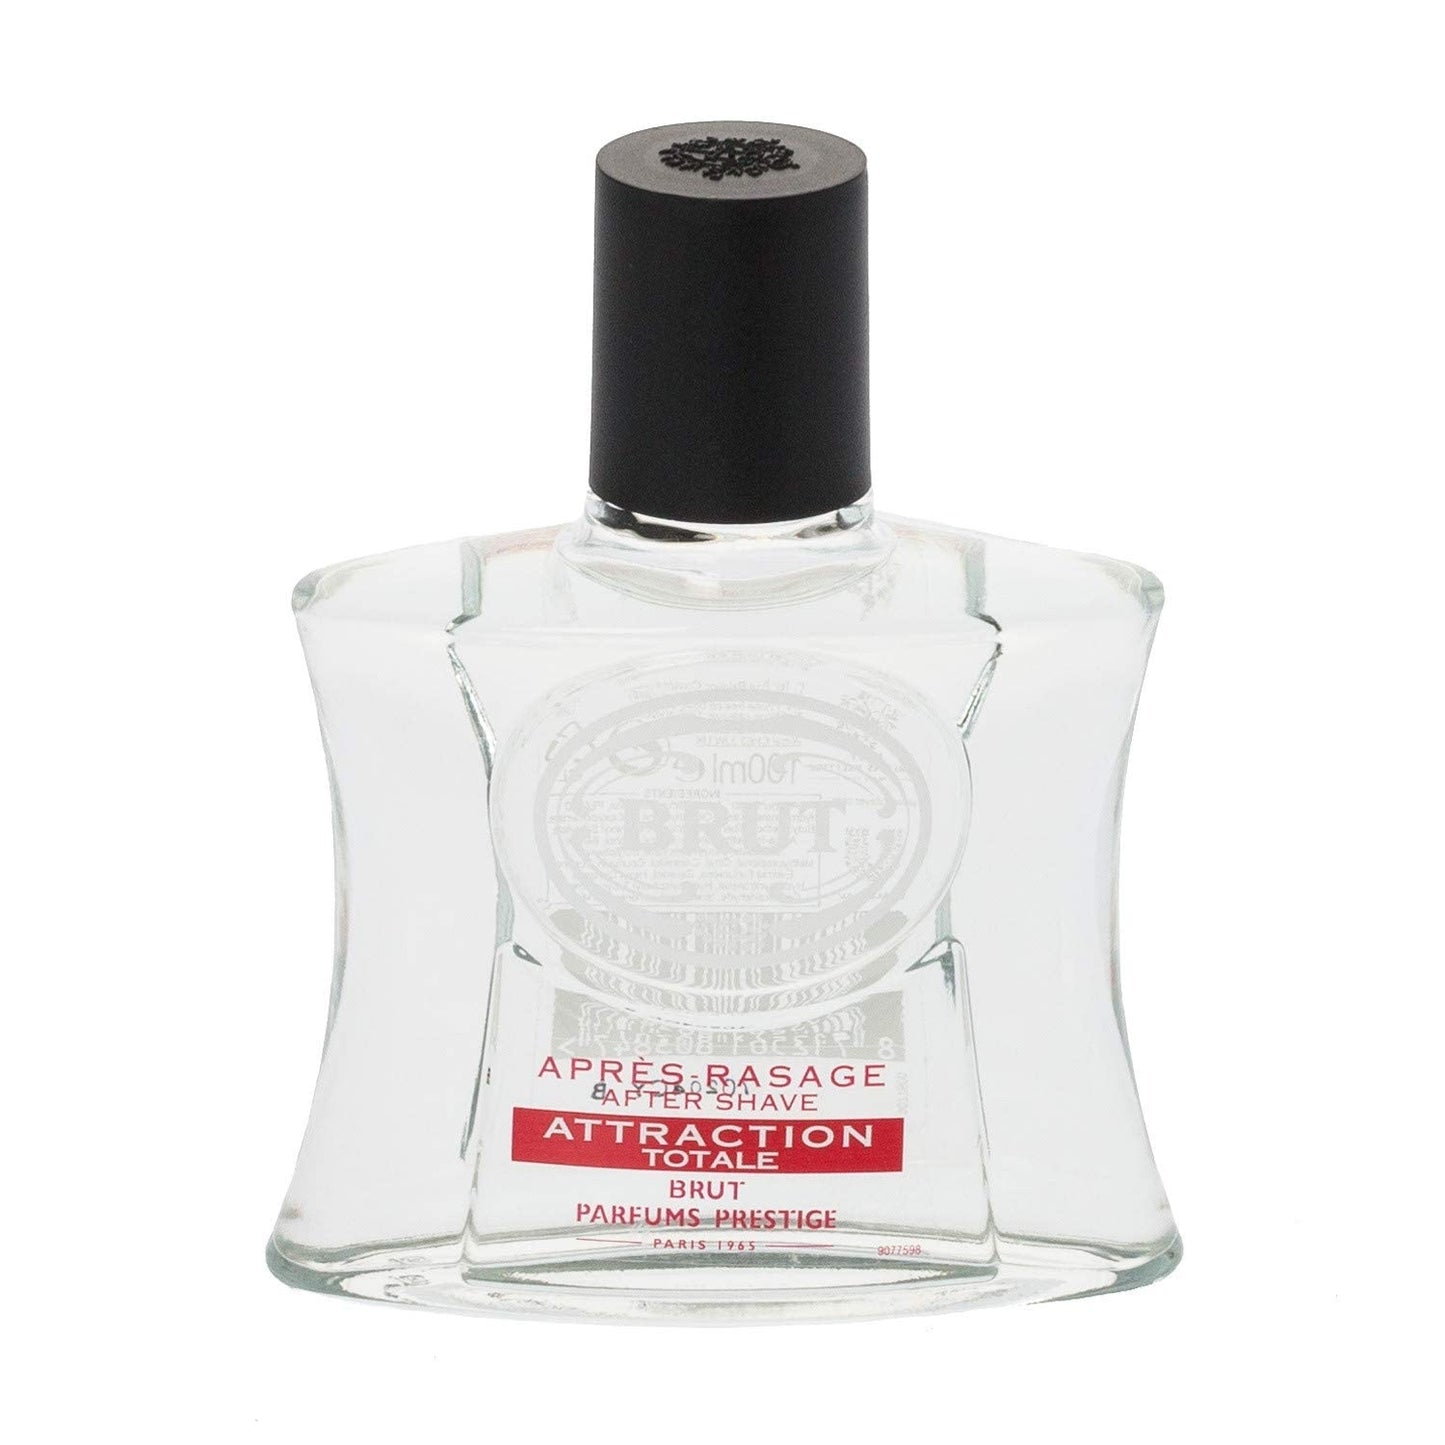 BRUT ATTRACTION TOTALE AFTER SHAVE 100ml